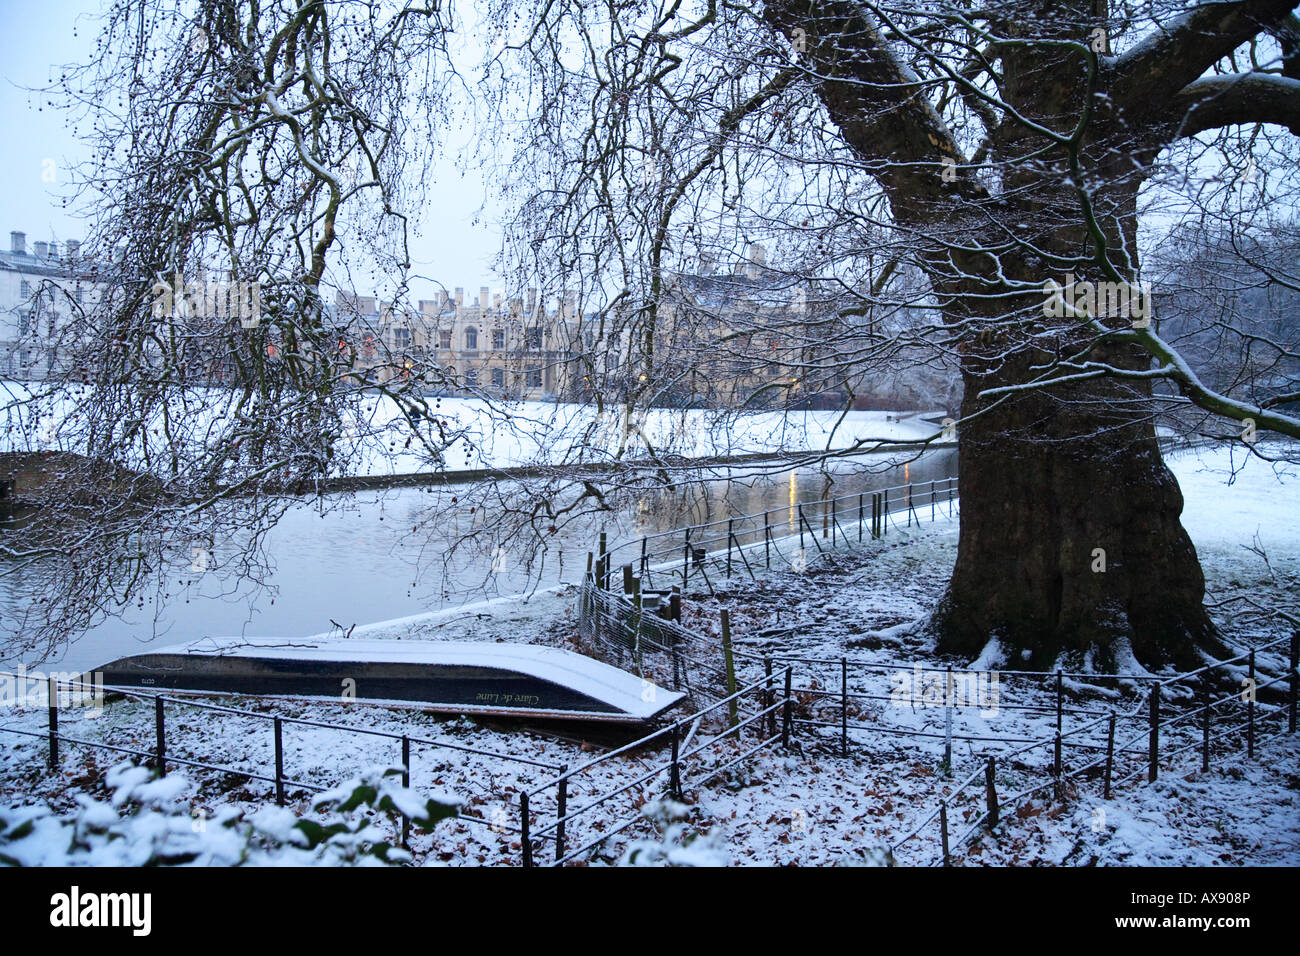 'Clare college Cambridge' and the 'River Cam' with an upturned punt in the snow, 'Cambridge university' Stock Photo